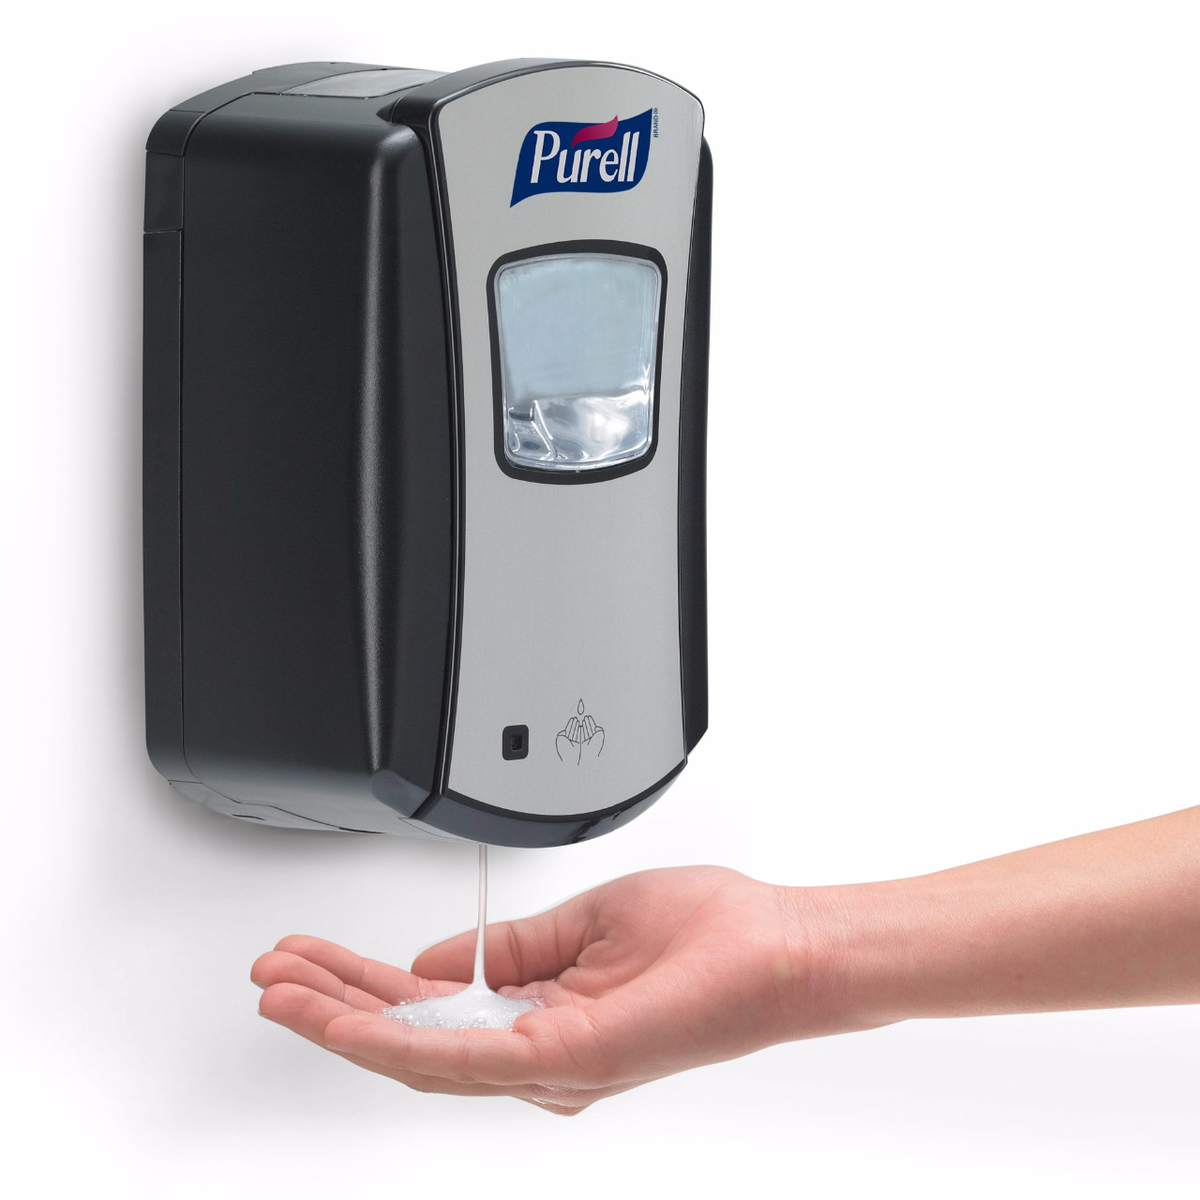 image of Purell wall dispenser with hand underneath